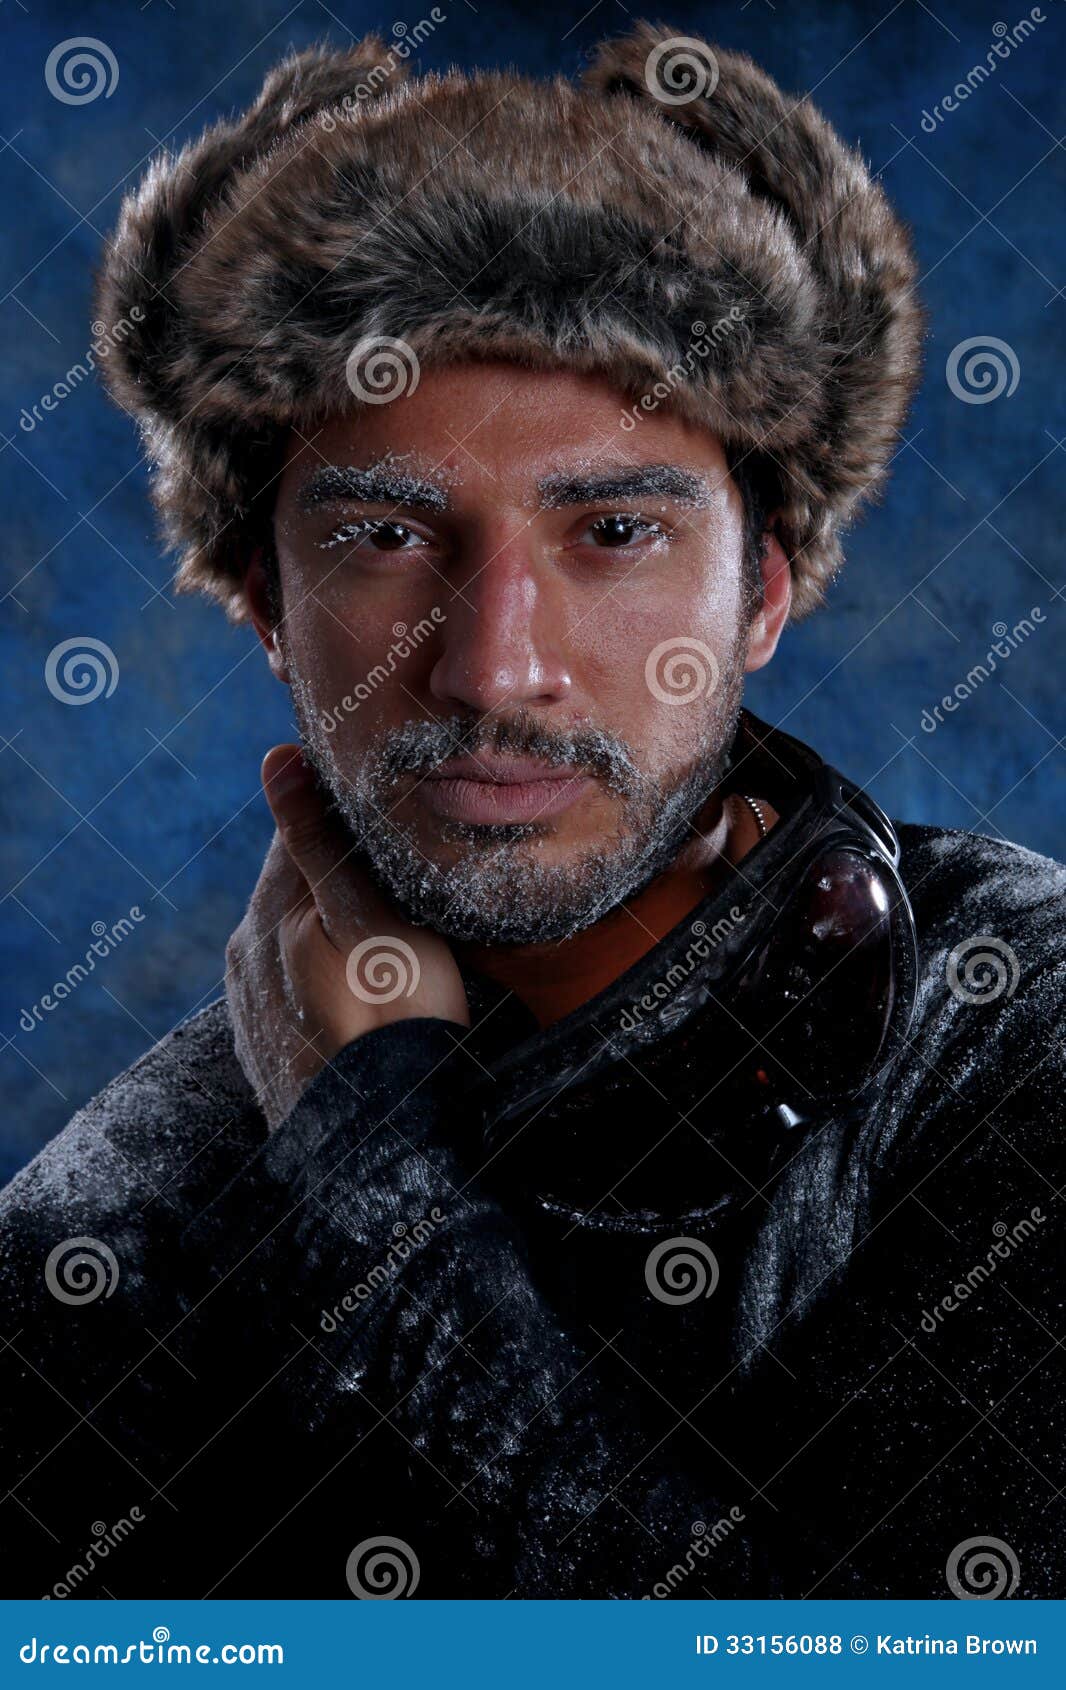 man freezing in cold weather